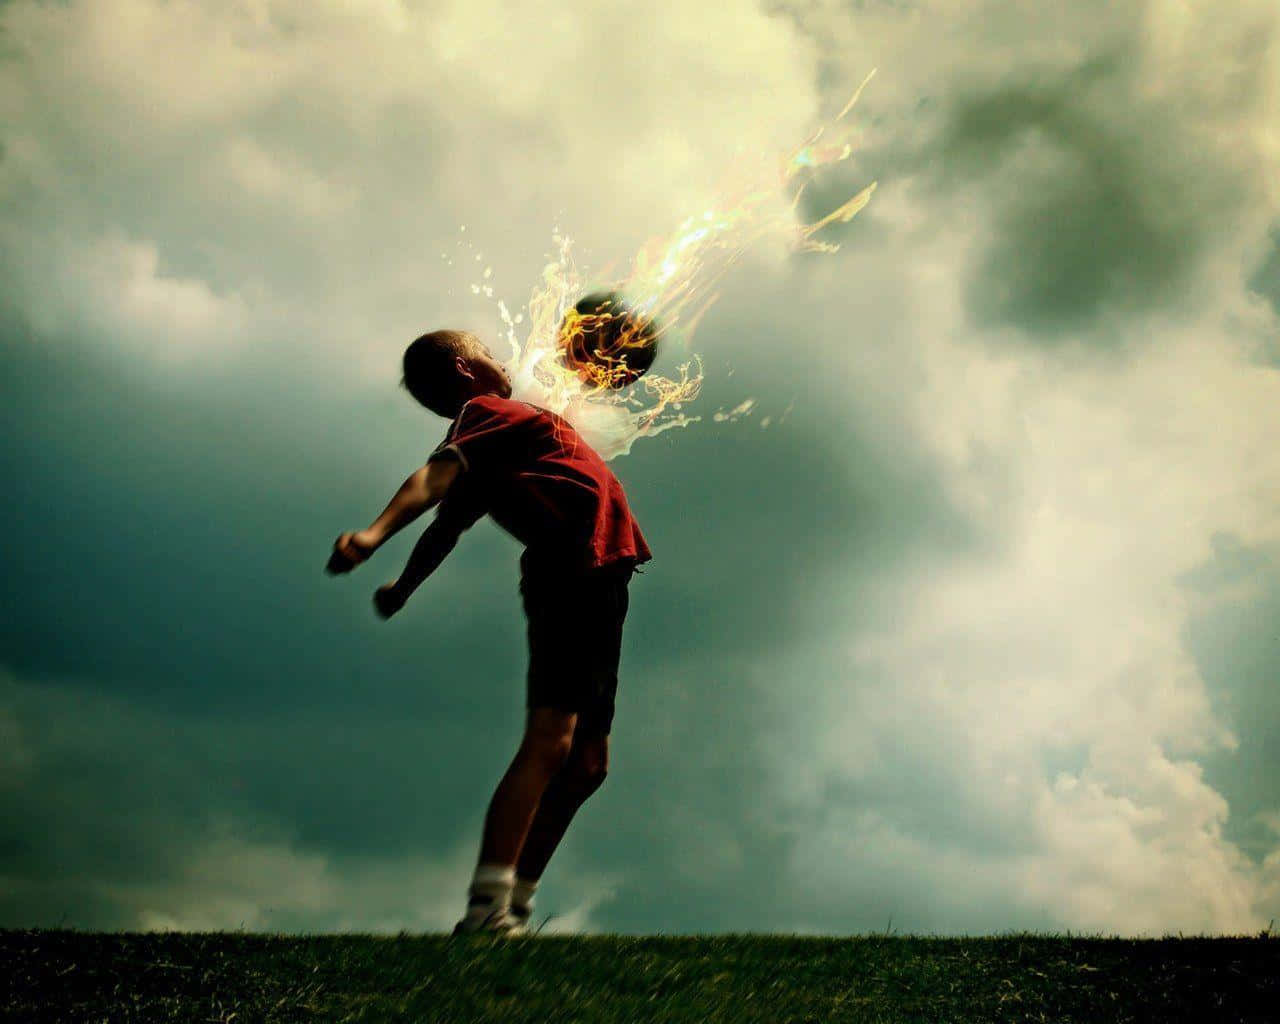 A Boy Catches A Fireball In The Air Background